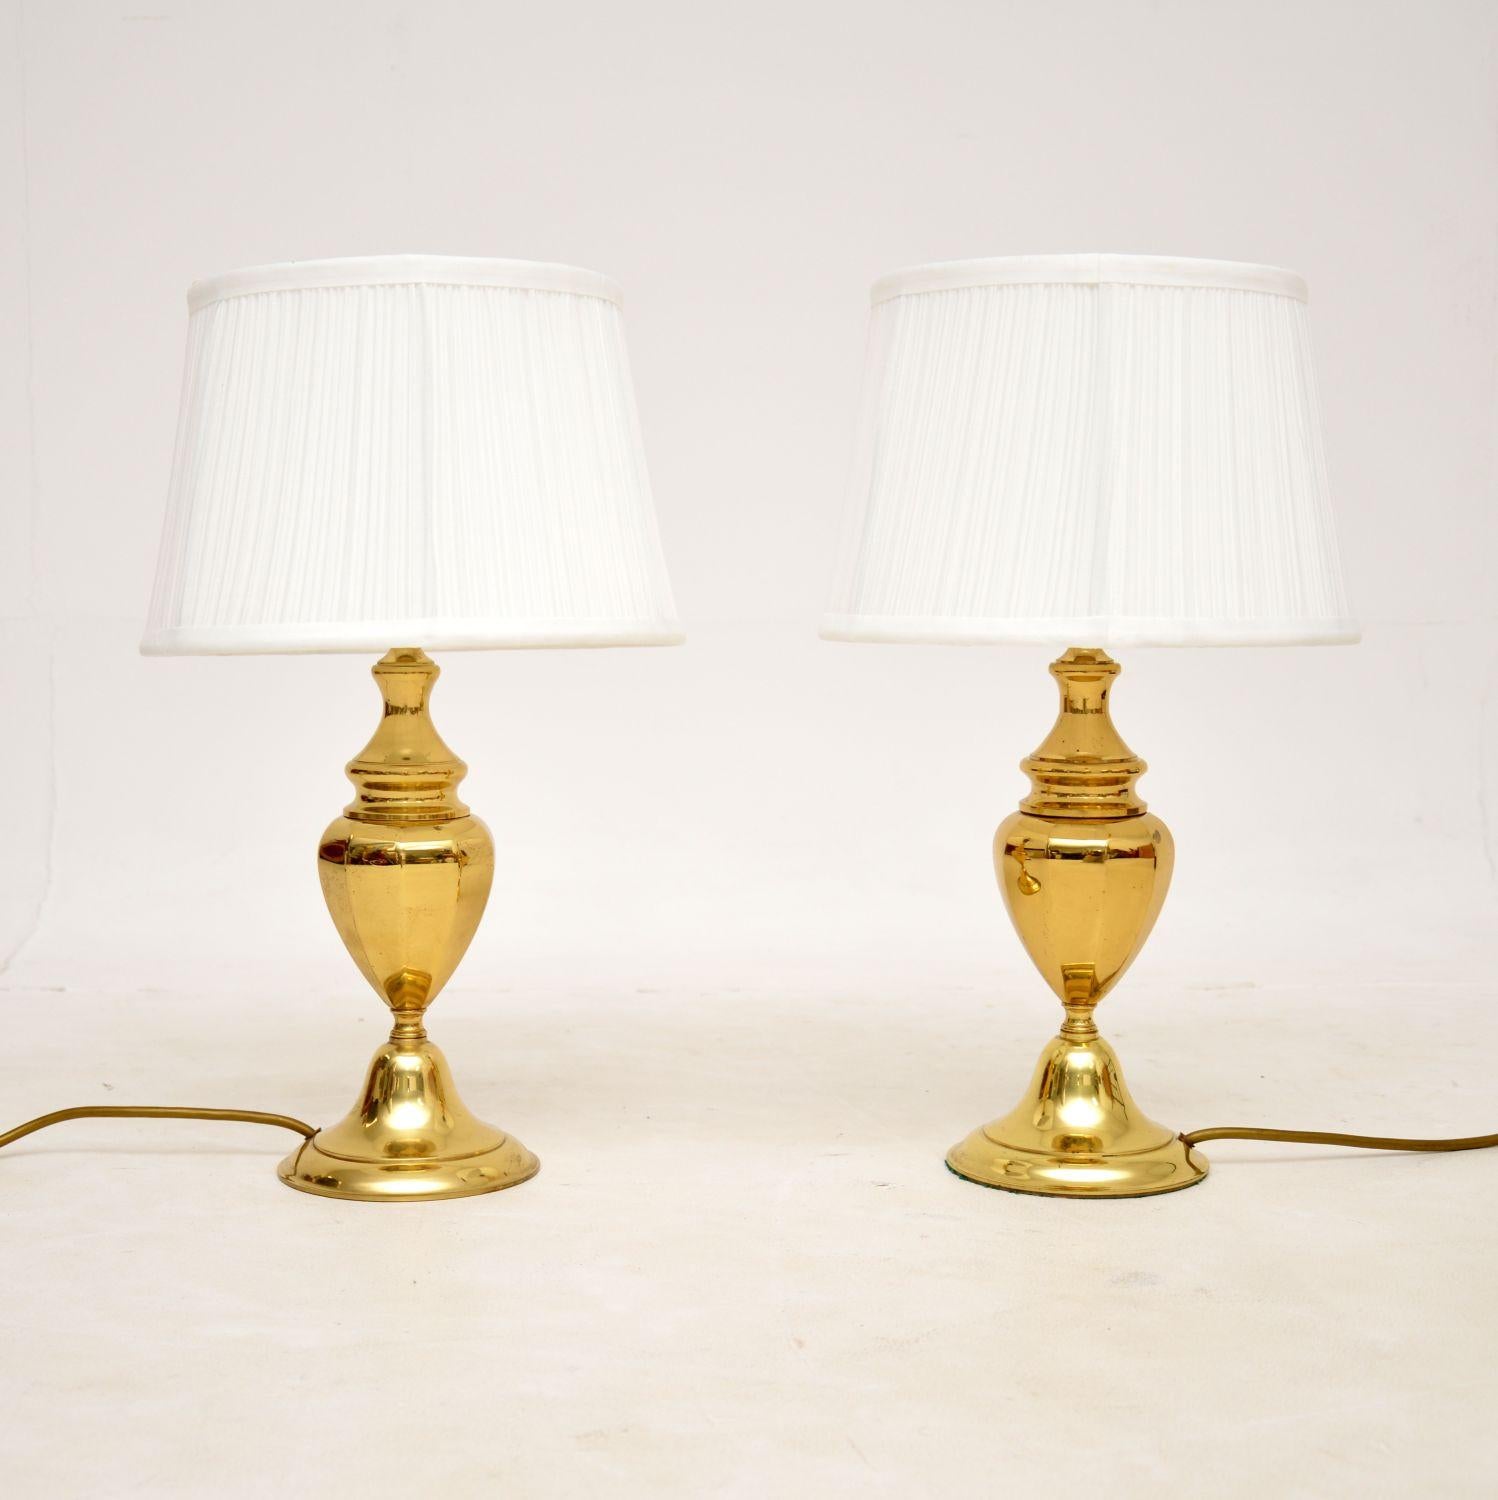 A stunning pair of vintage table lamps in solid brass. They were made in England, and date from the 1970s.

The quality is superb, the bases have a gorgeous urn shaped design. They are fairly petite yet heavy and solid for their size.

They are